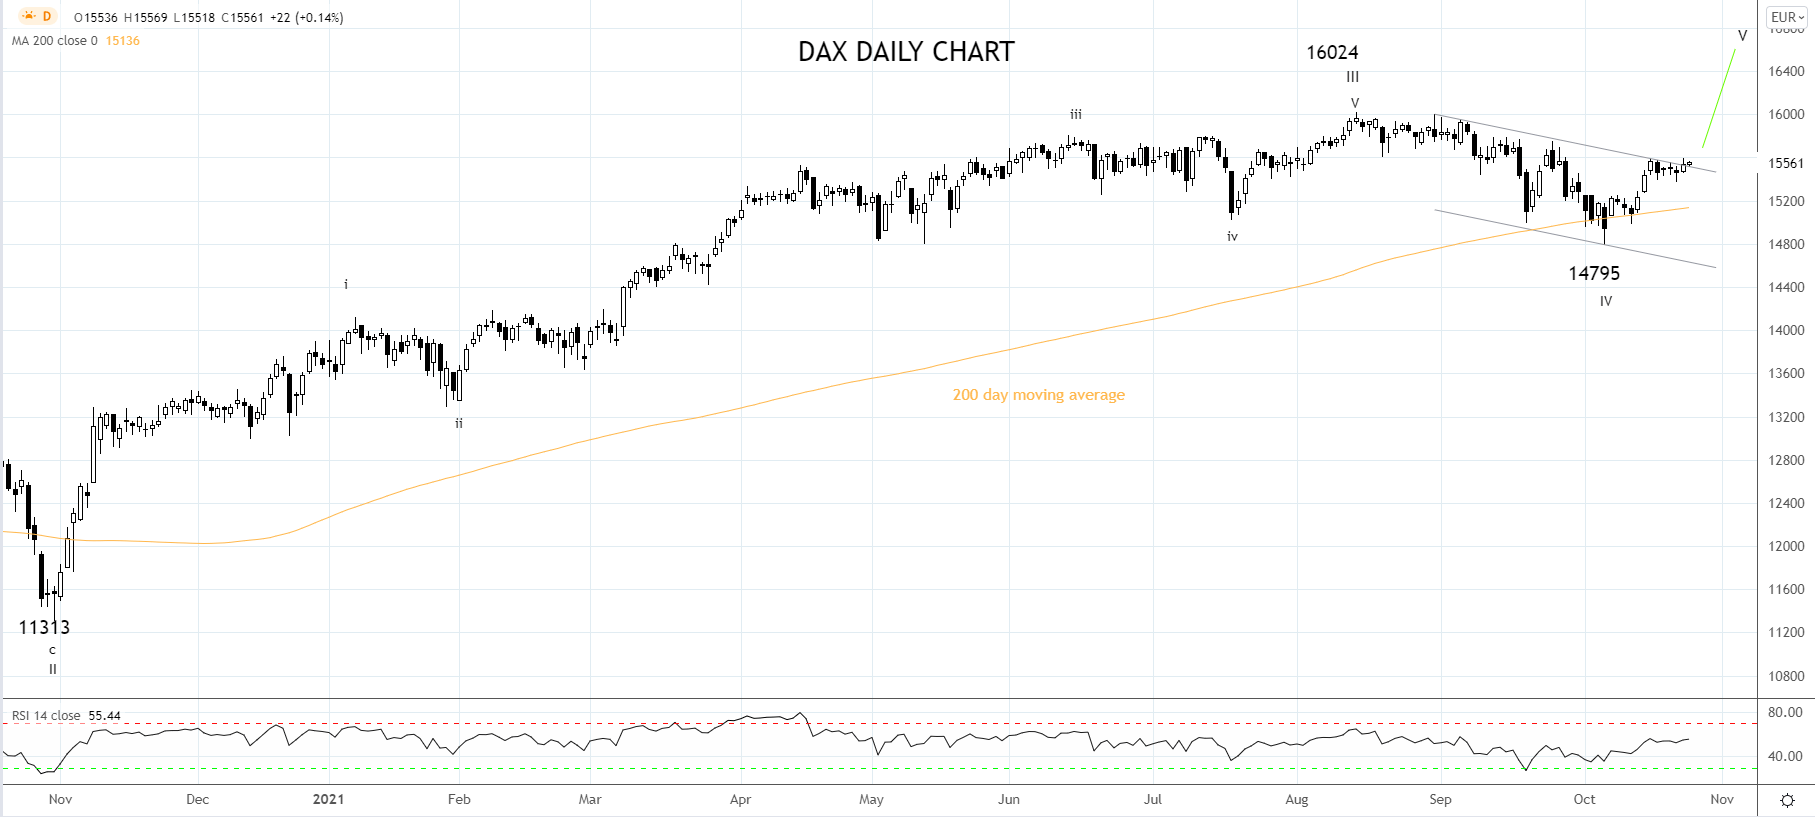 DAX Daily chart 25th of October 2021